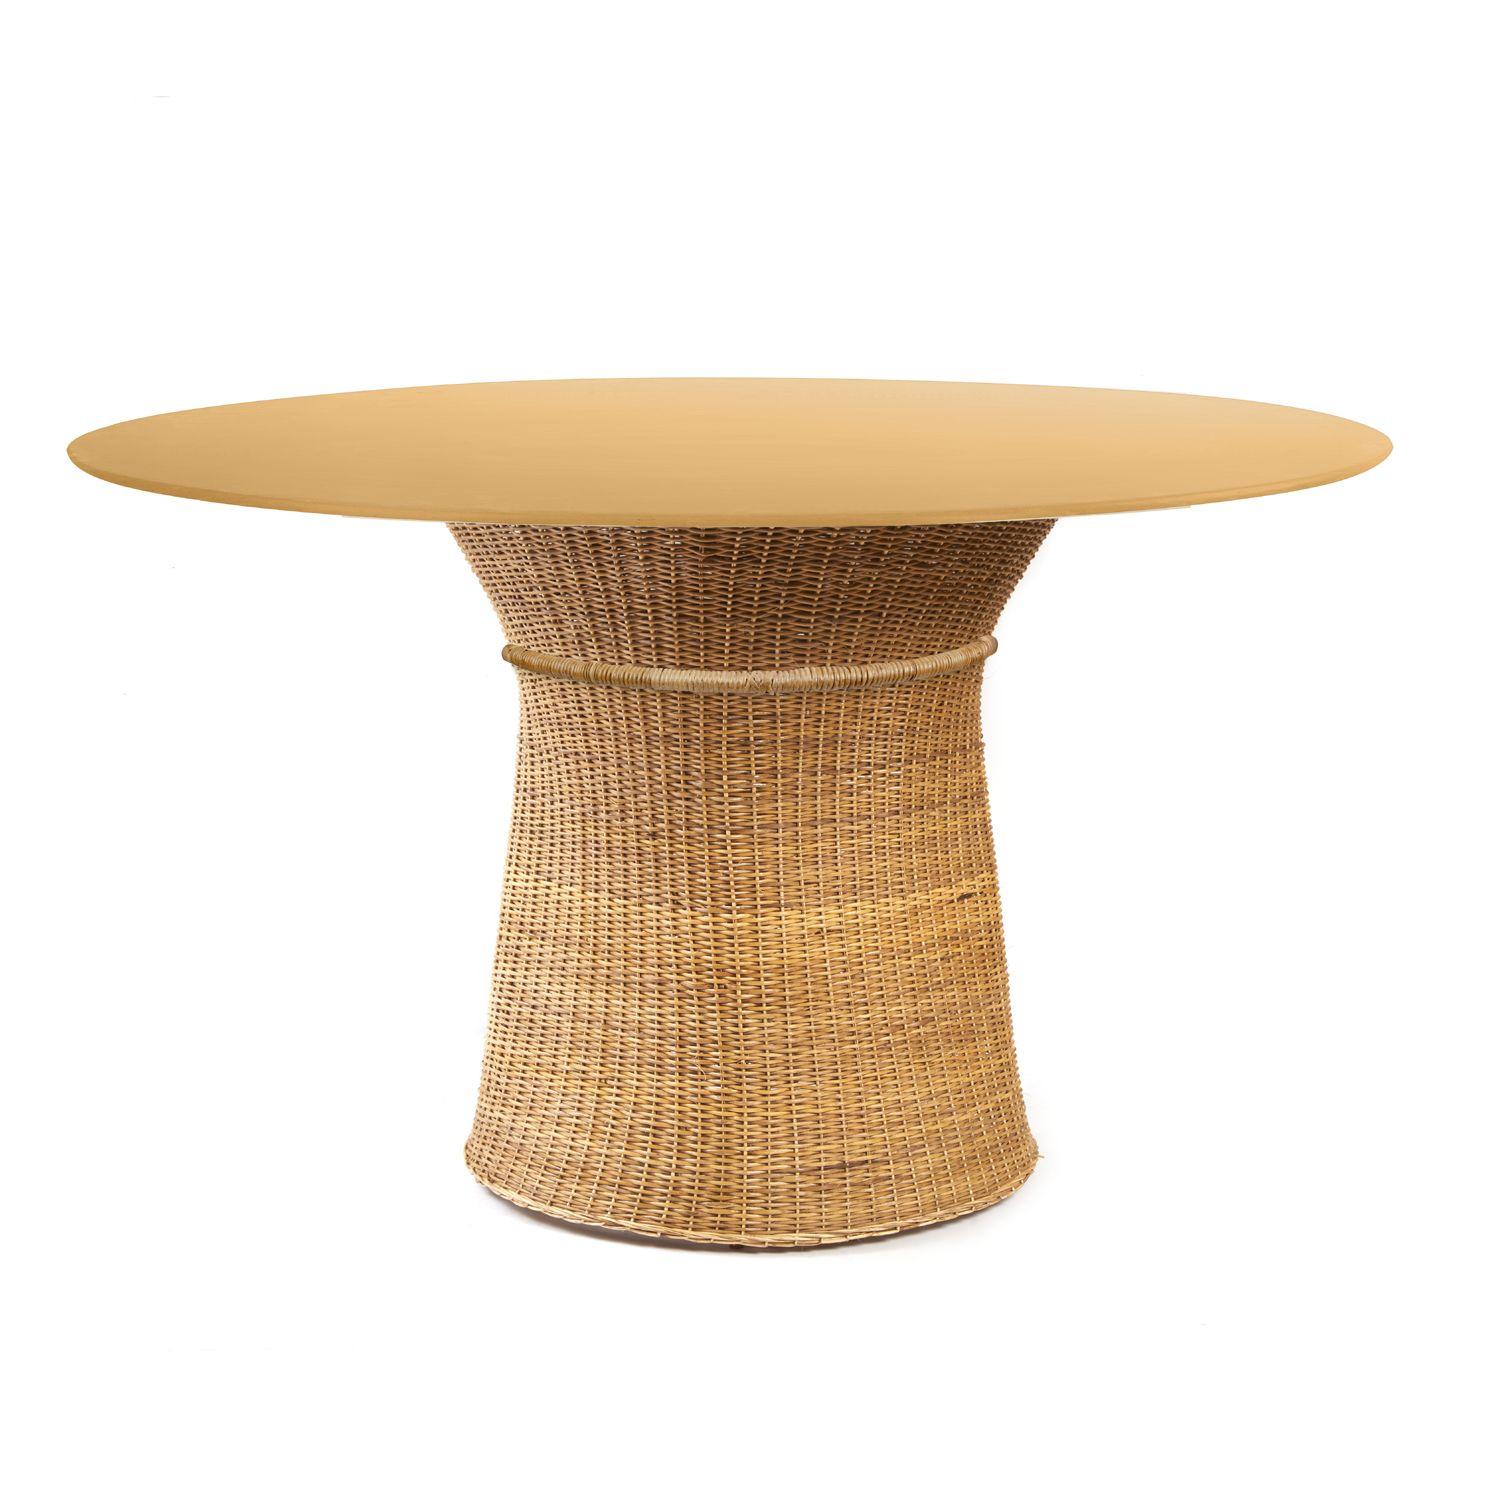 Caribe Natural dining table by Sebastian Herkner
Materials: Wicker from Bejuco roots. Galvanized and powder-coated tubular steel frame.
Technique: Weaved by local craftspeople in Colombia. 
Dimensions: 
Top Diameter 135 cm 
Base Diameter 59 x